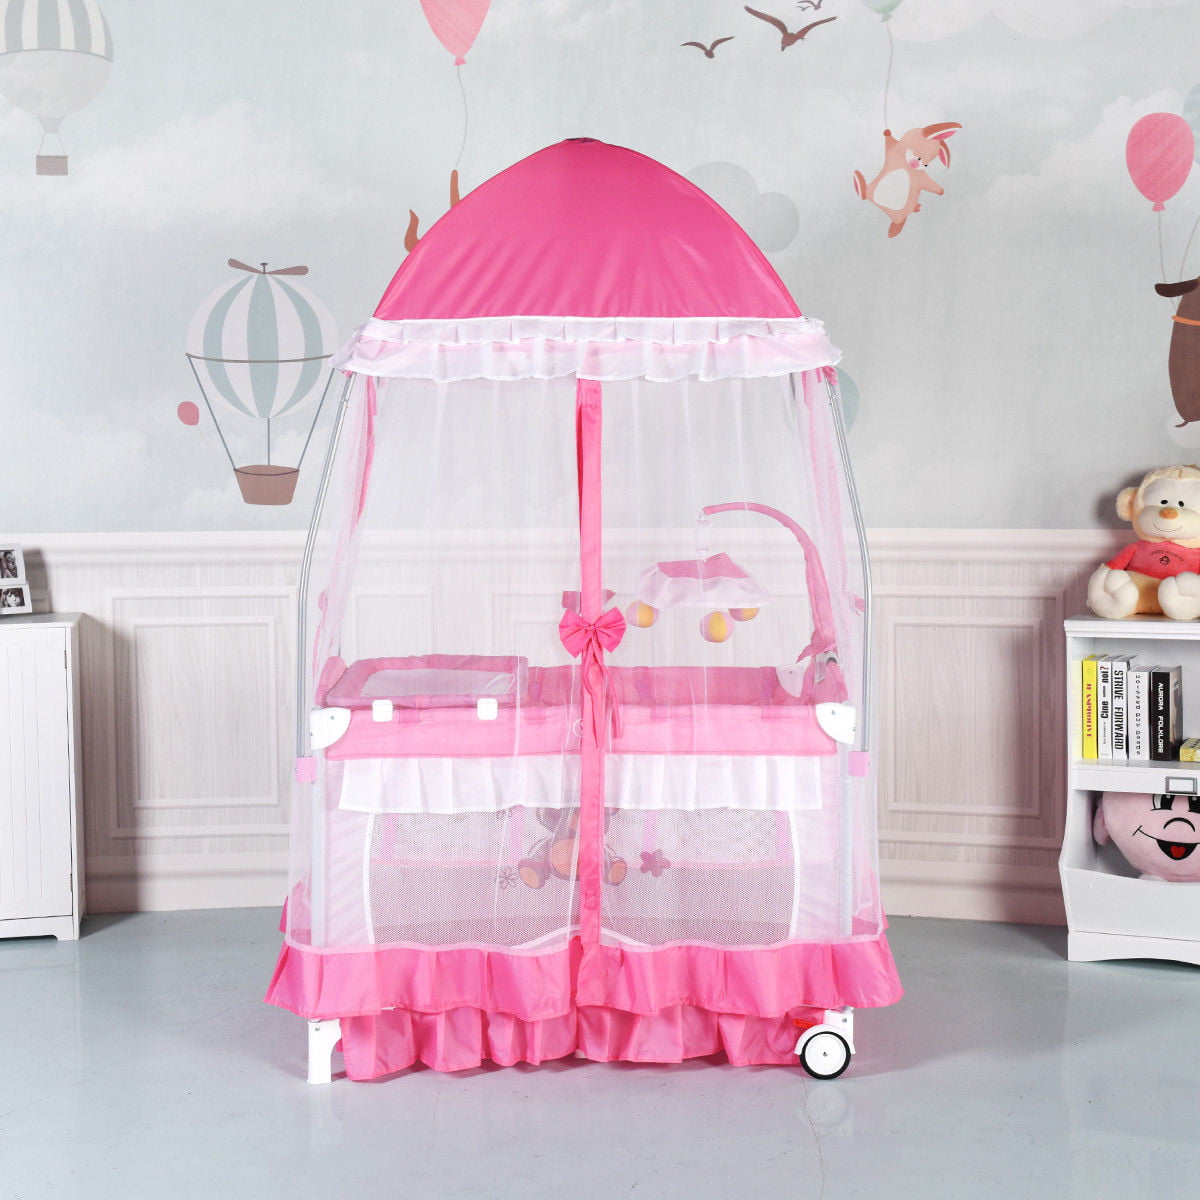 Pink Cute Whirling Toys BABY JOY Portable Playard Wheels & Brake Music Box Travel Ready with Oxford Carry Bag Changing Table Convertible Baby Playpen with Removable Bassinet Mosquito Mesh Net 